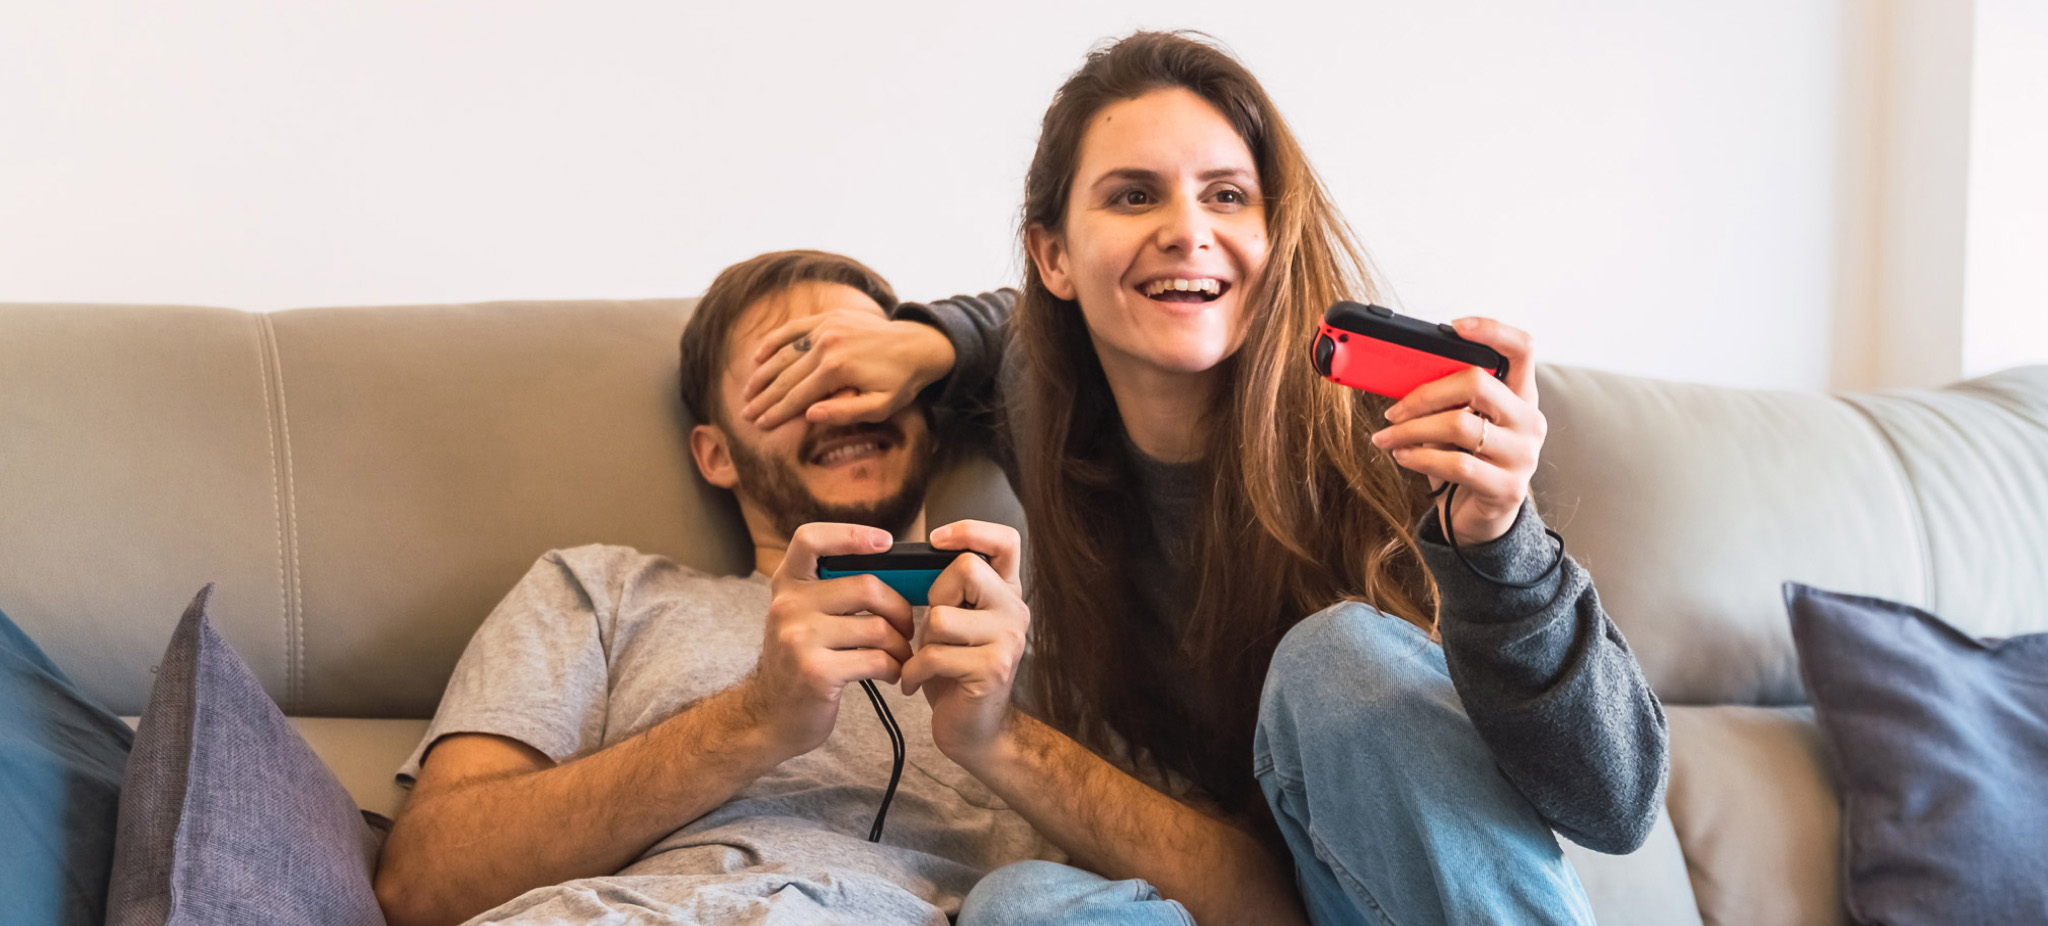 a couple playing video games with Nintendo game consoles